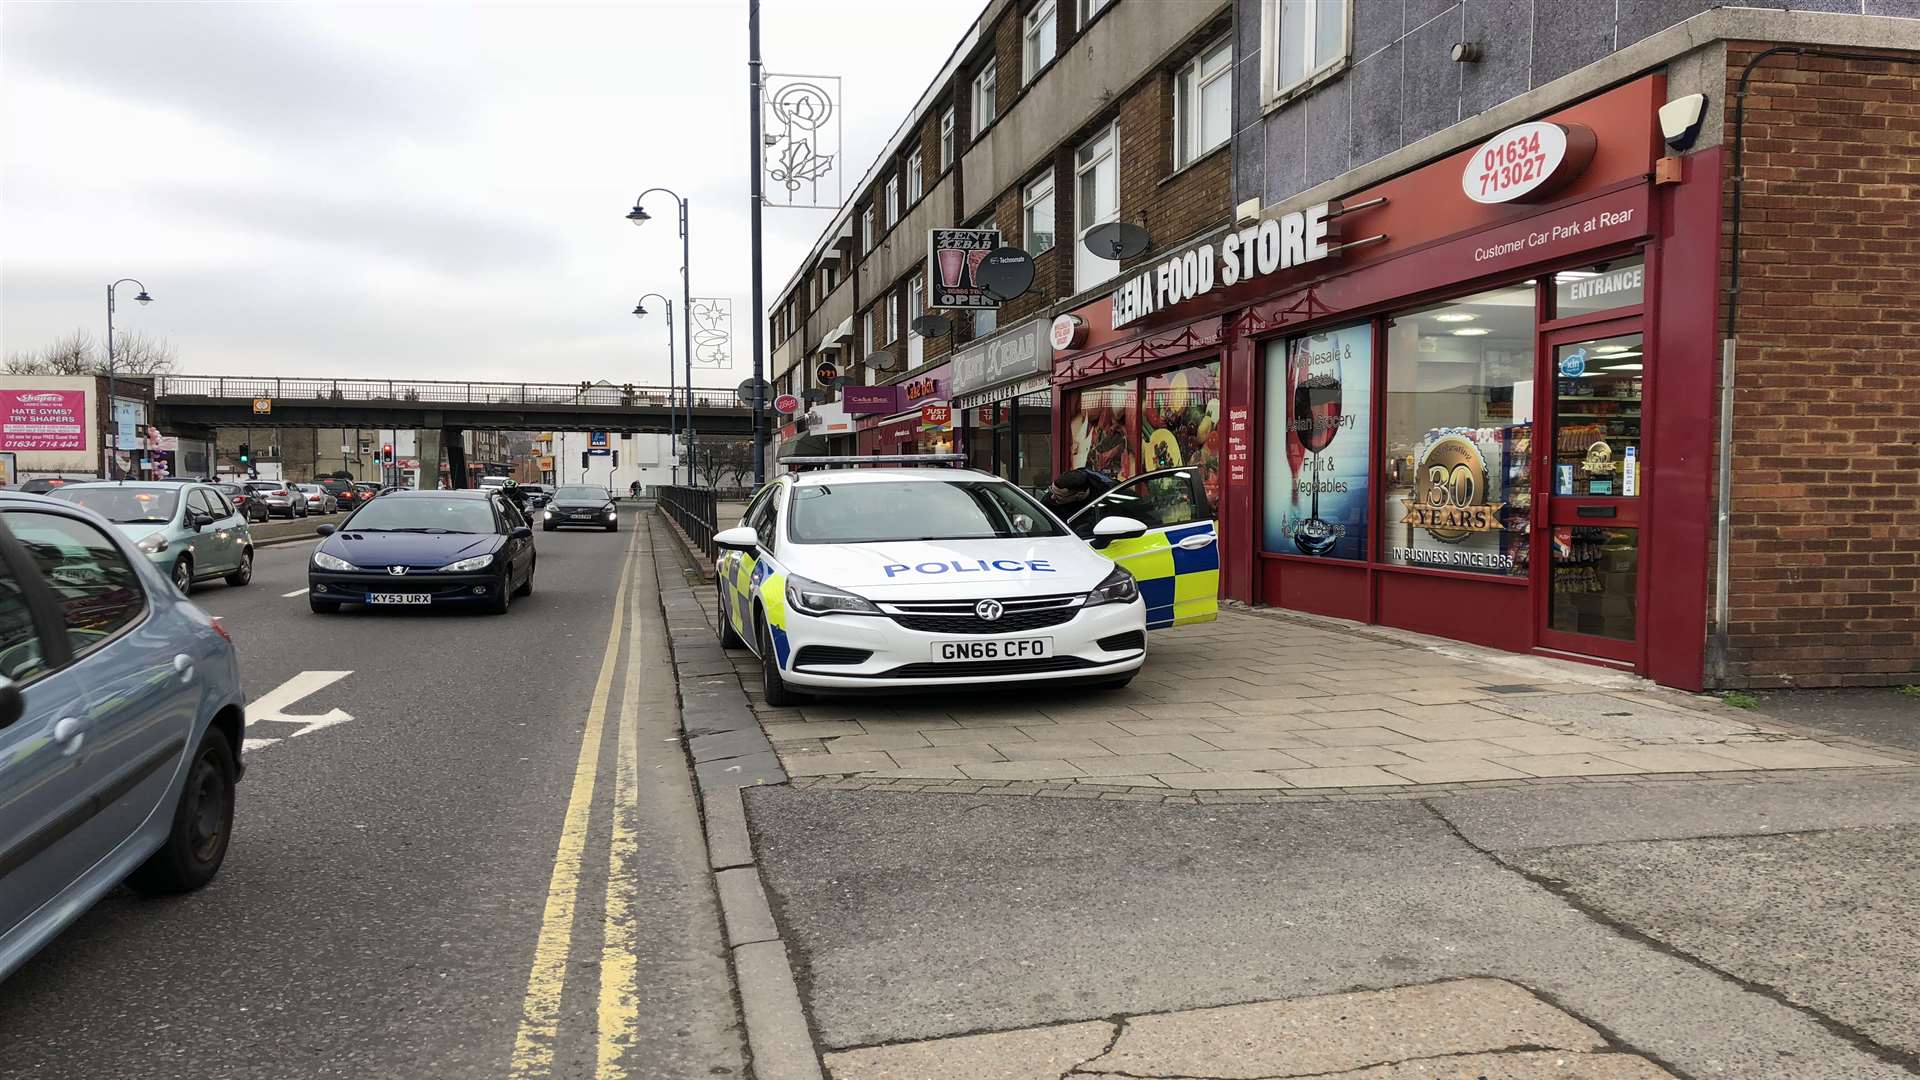 An assault was reported outside a row of shops in the High Street, Strood.